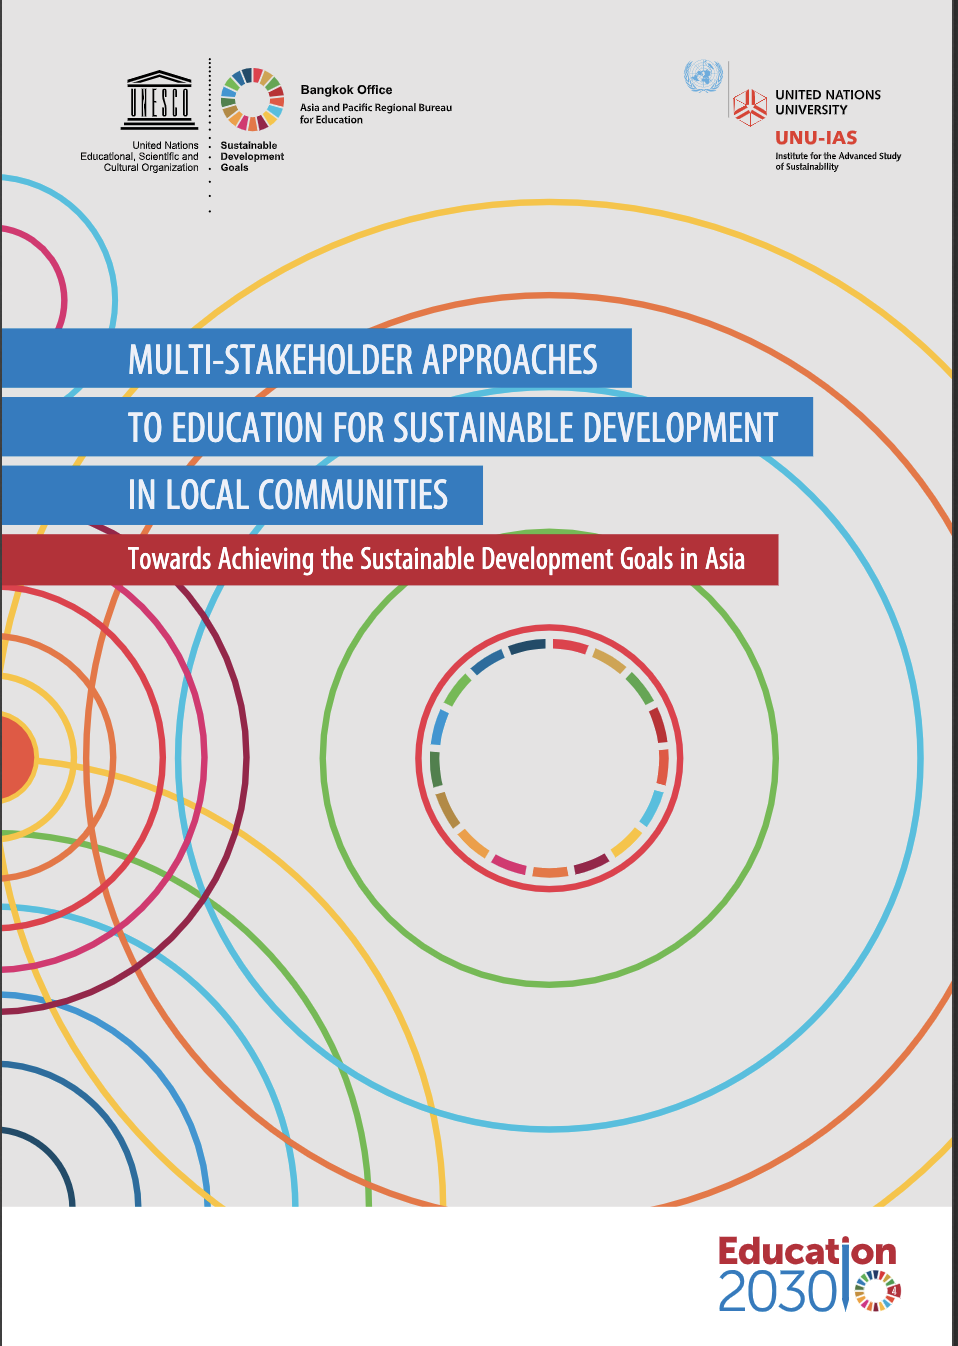 Multi-stakeholder Approaches to Education for Sustainable Development in Local Communities: Towards Achieving the SDGs in Asia